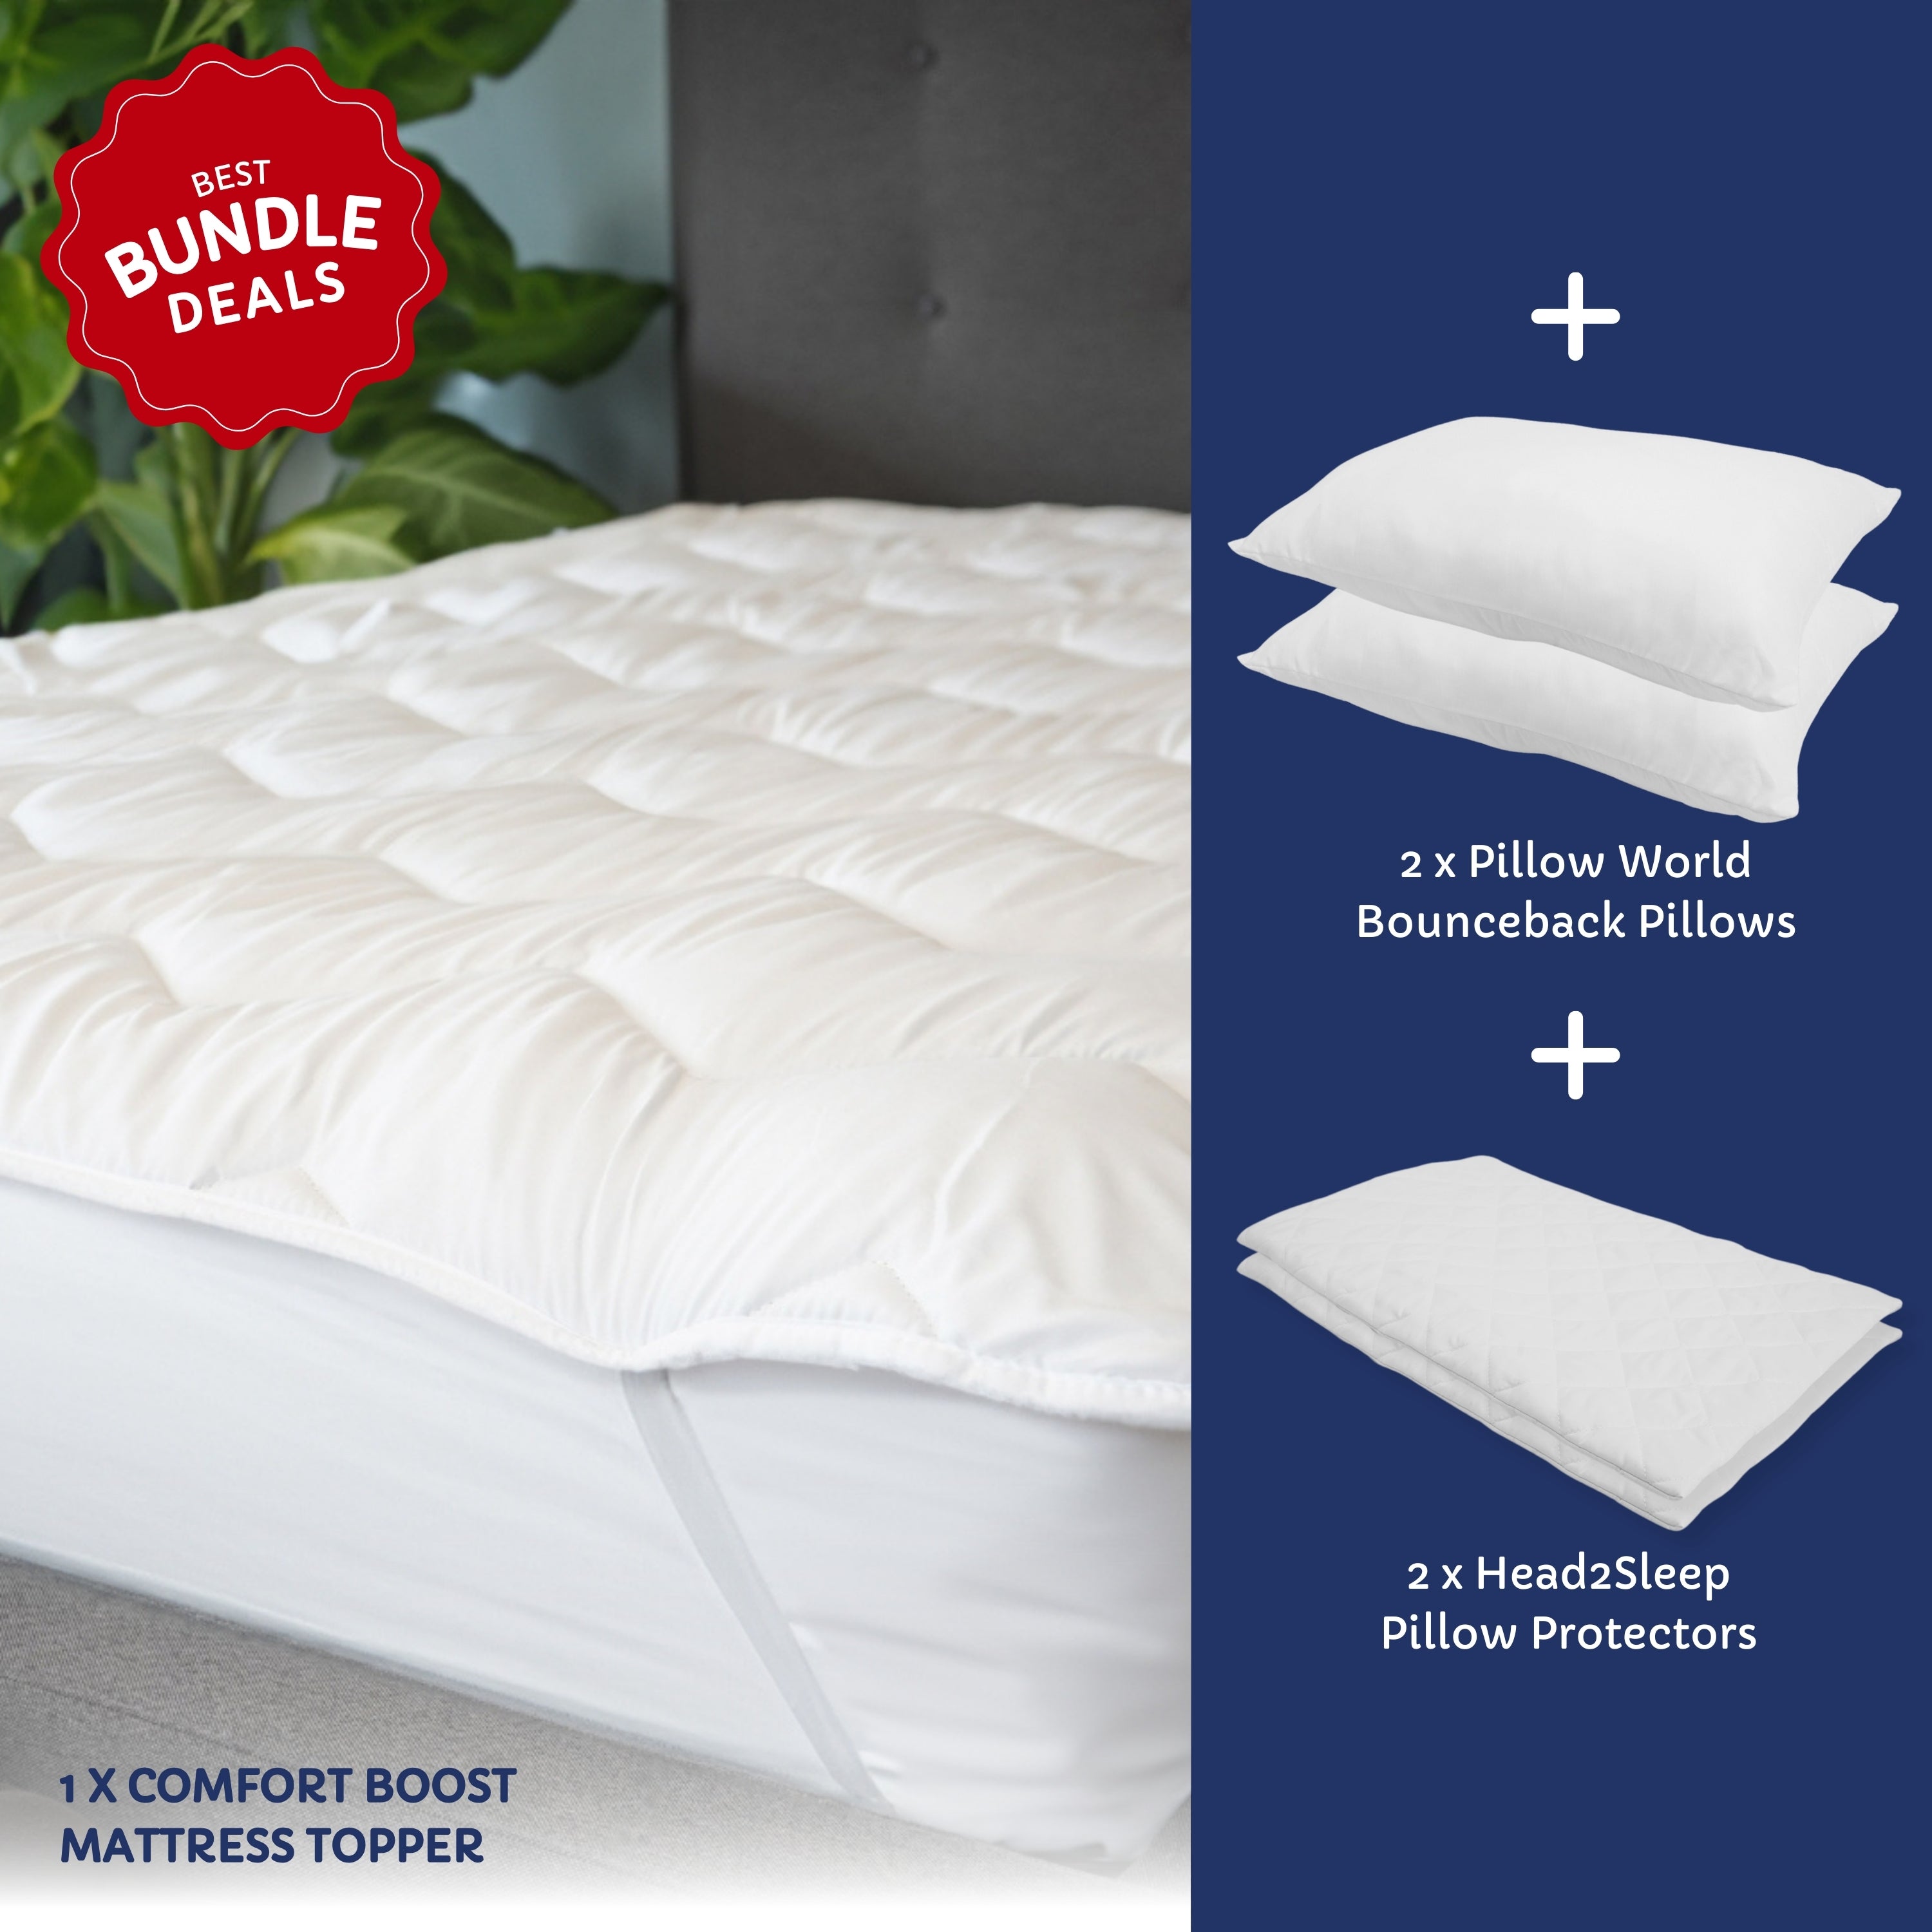 Comfort Boost Bundle - Mattress Topper with Pillows and Pillow Protectors